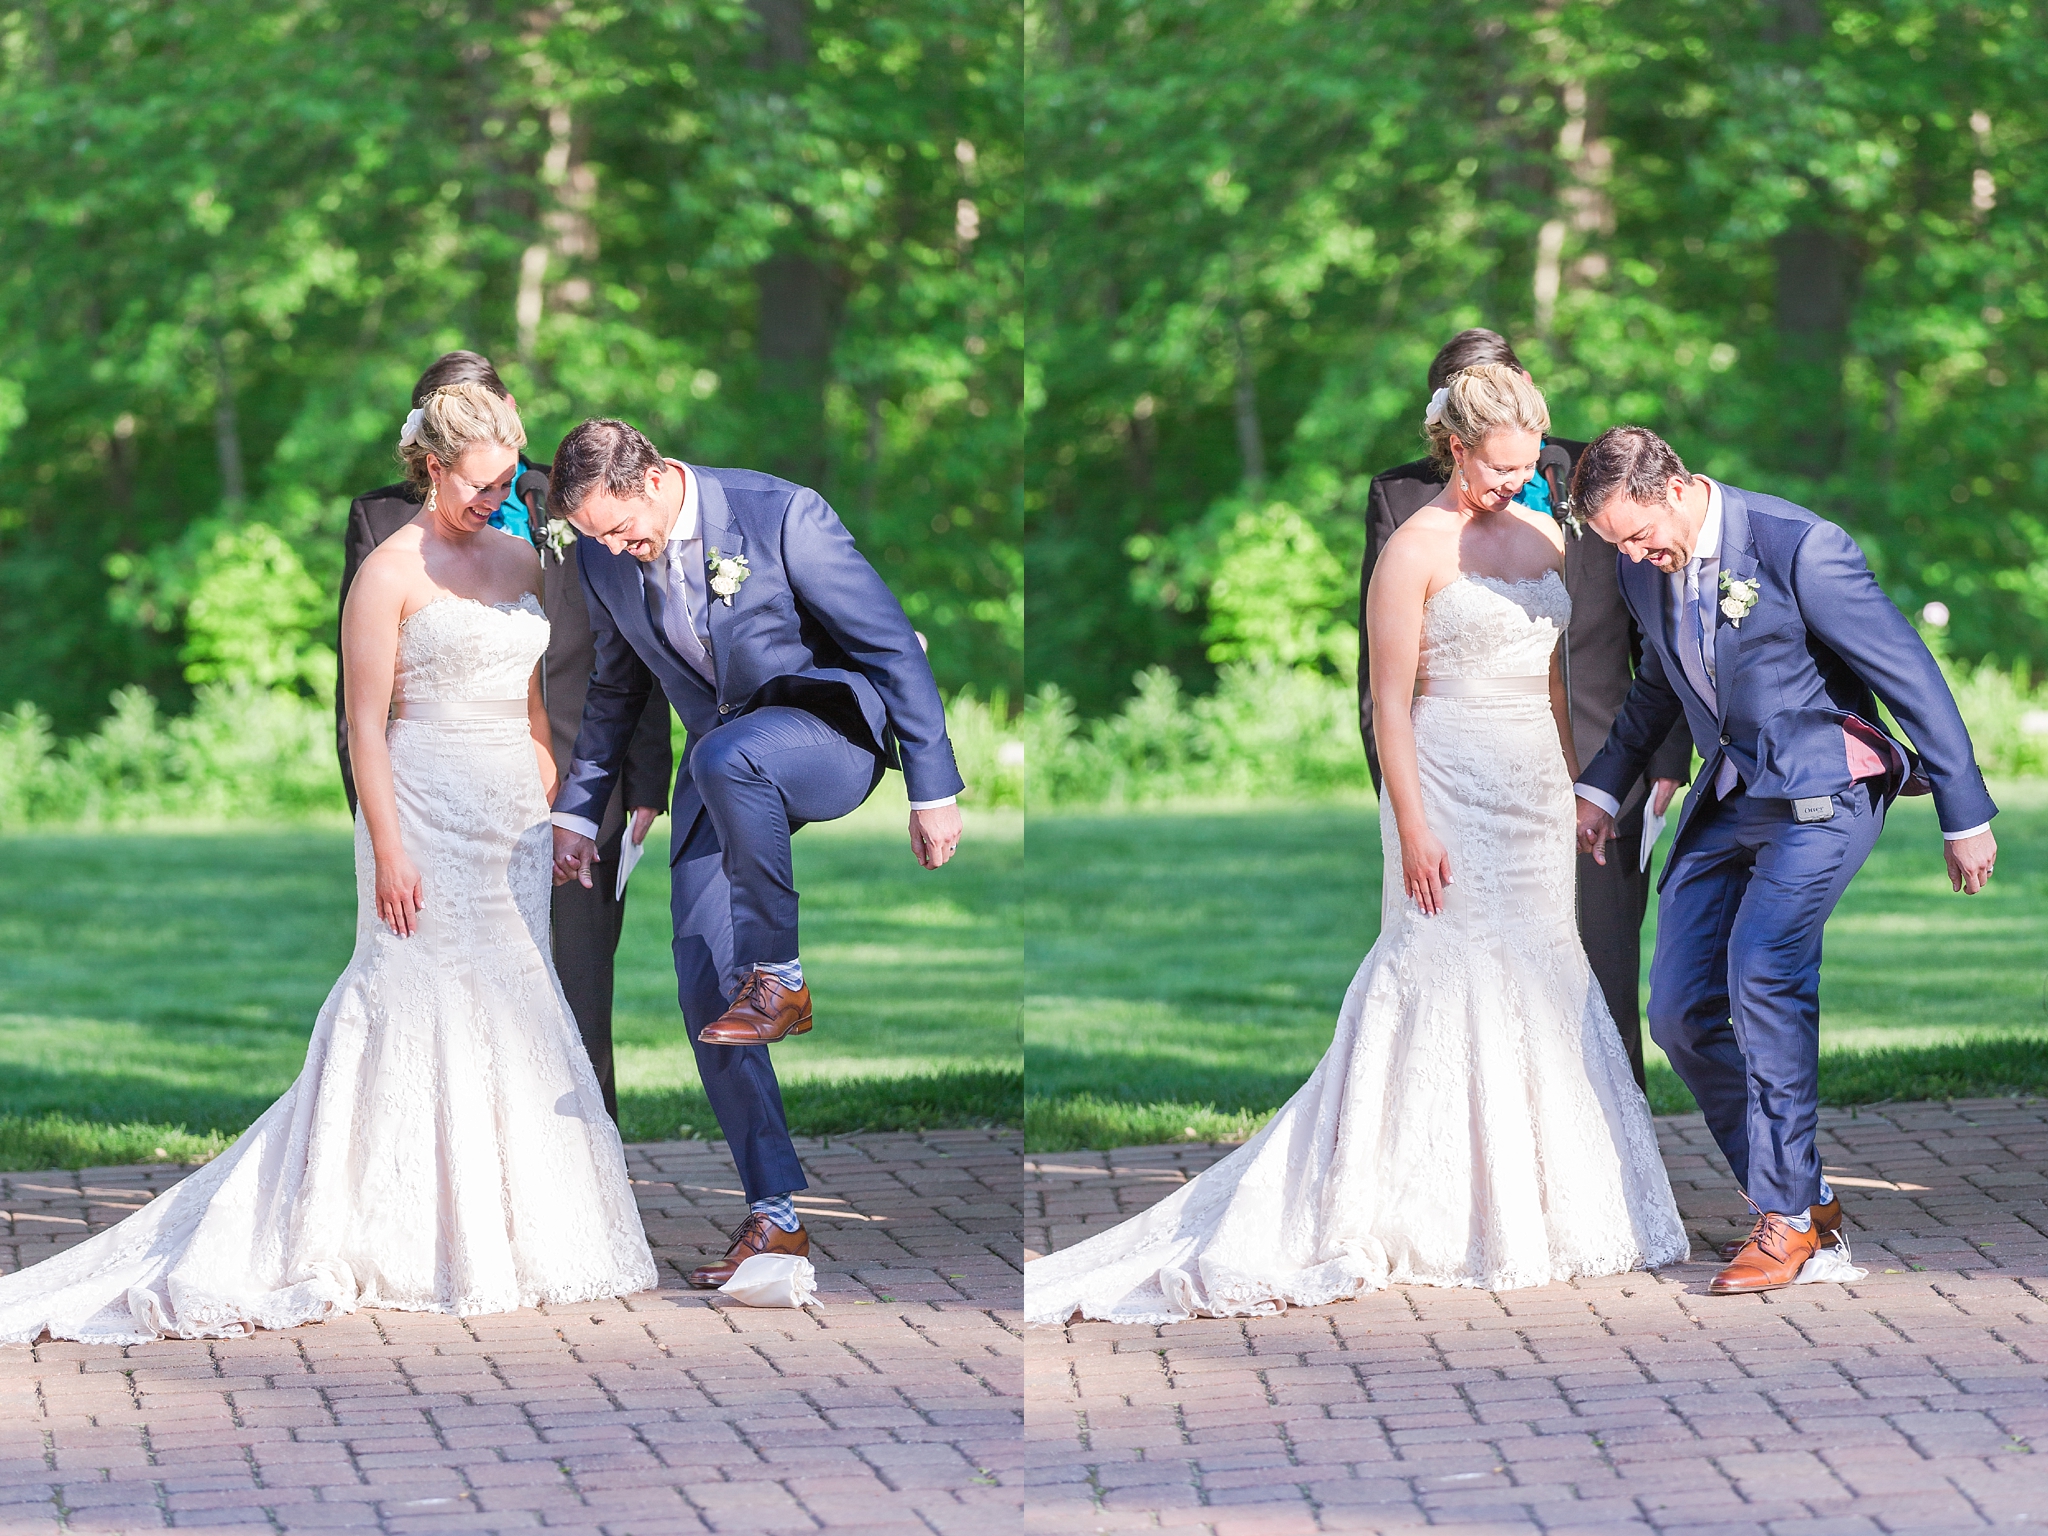 fun-candid-laid-back-wedding-photos-at-wellers-carriage-house-in-saline-michigan-and-at-the-eagle-crest-golf-resort-by-courtney-carolyn-photography_0072.jpg